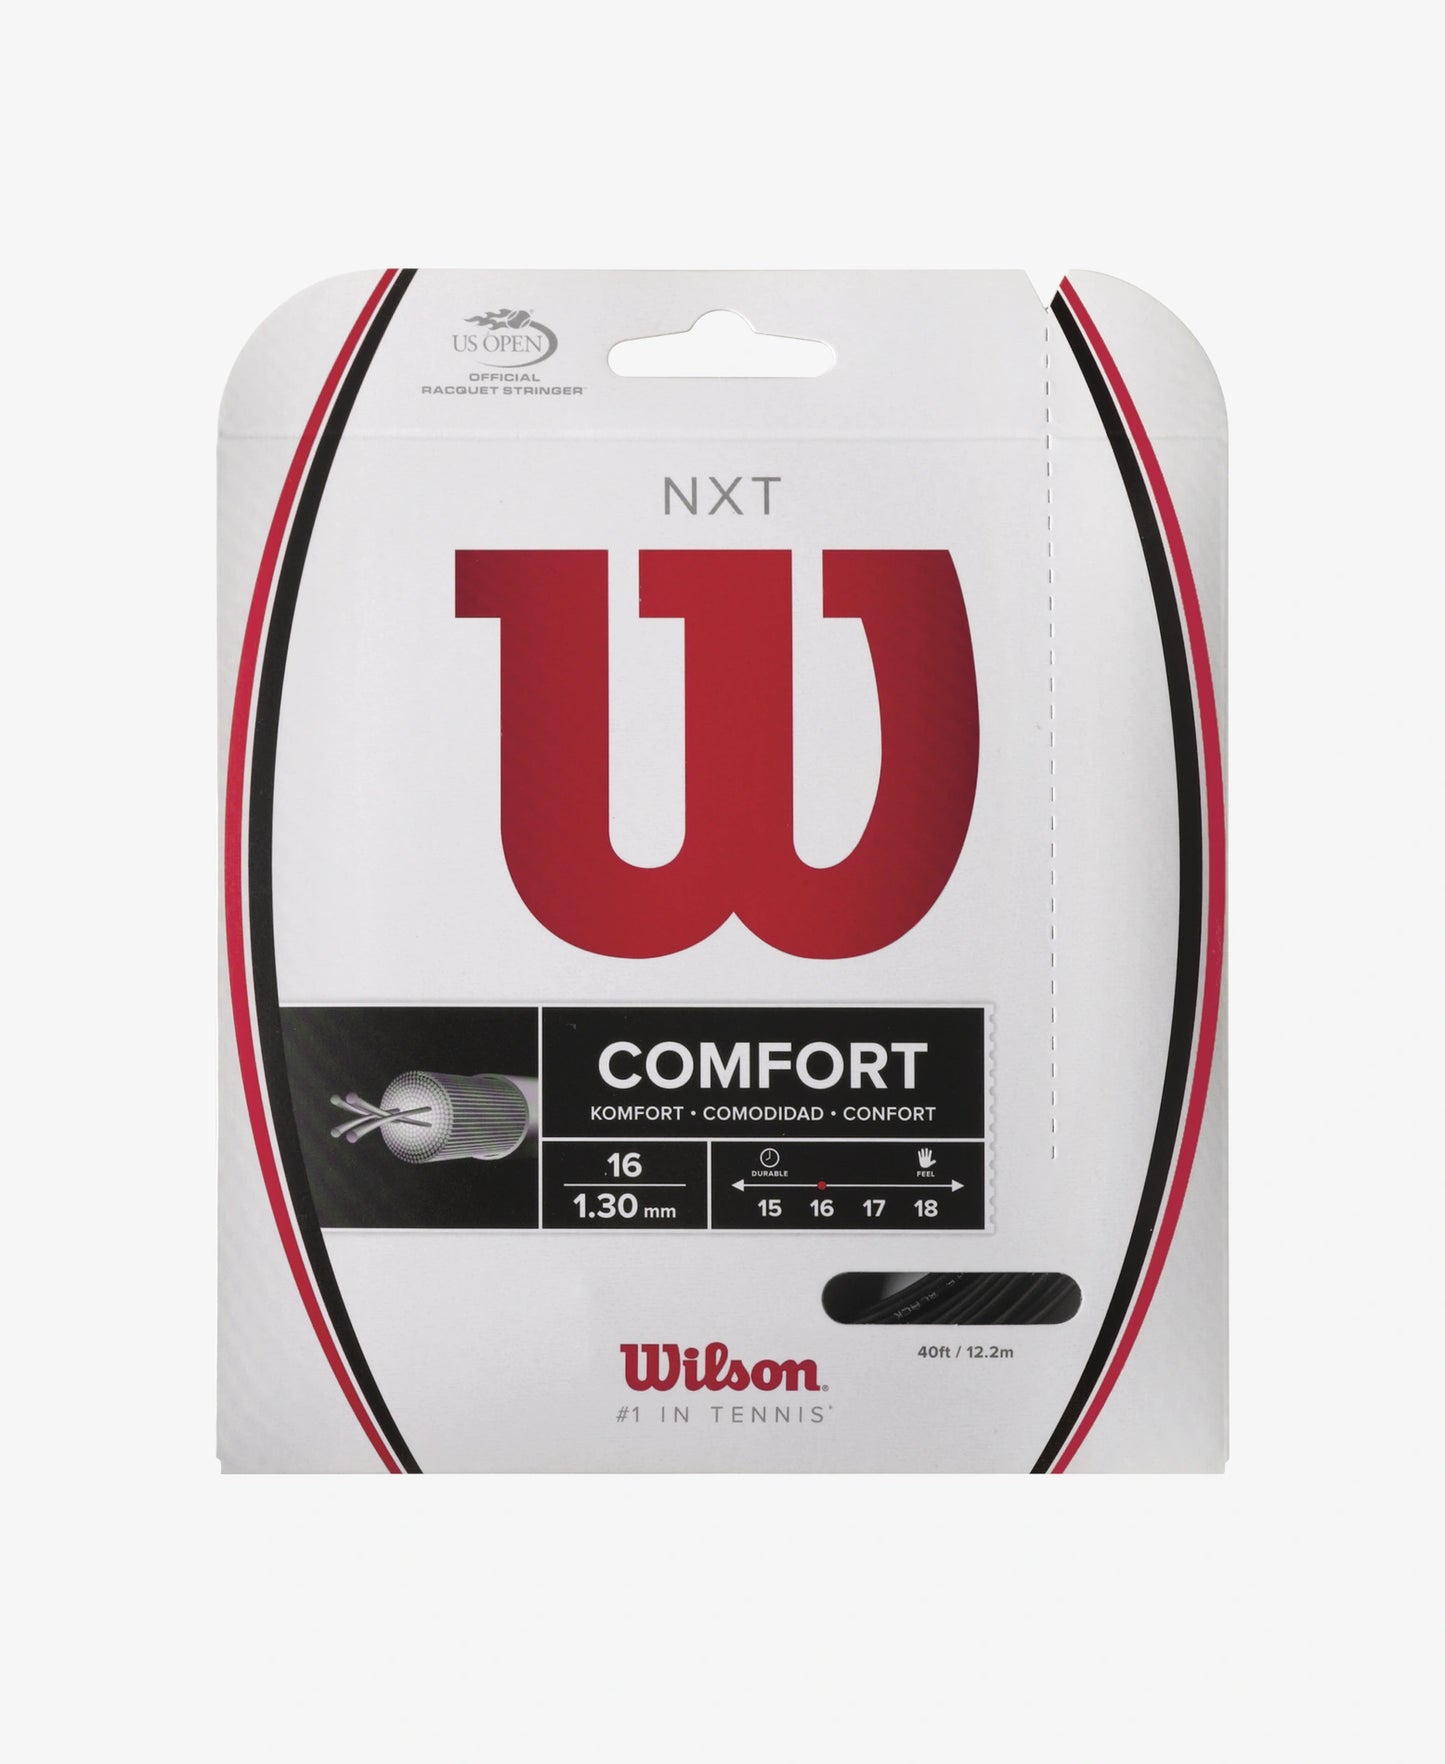 A set of Wilson NXT 16 Tennis String which is available for sale at GSM Sports.  